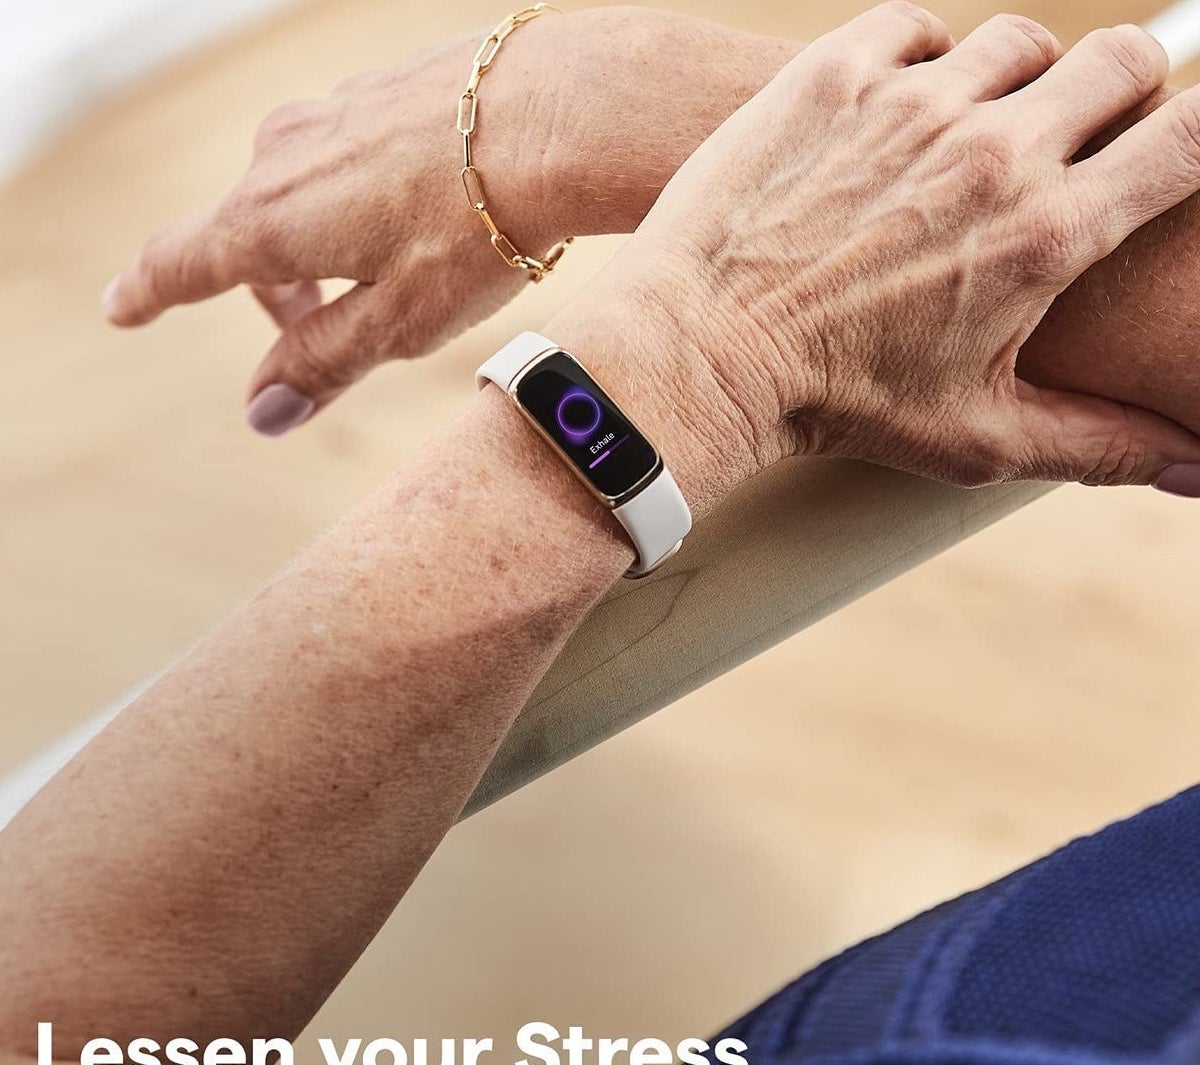 A person wearing the FitBit on their wrist